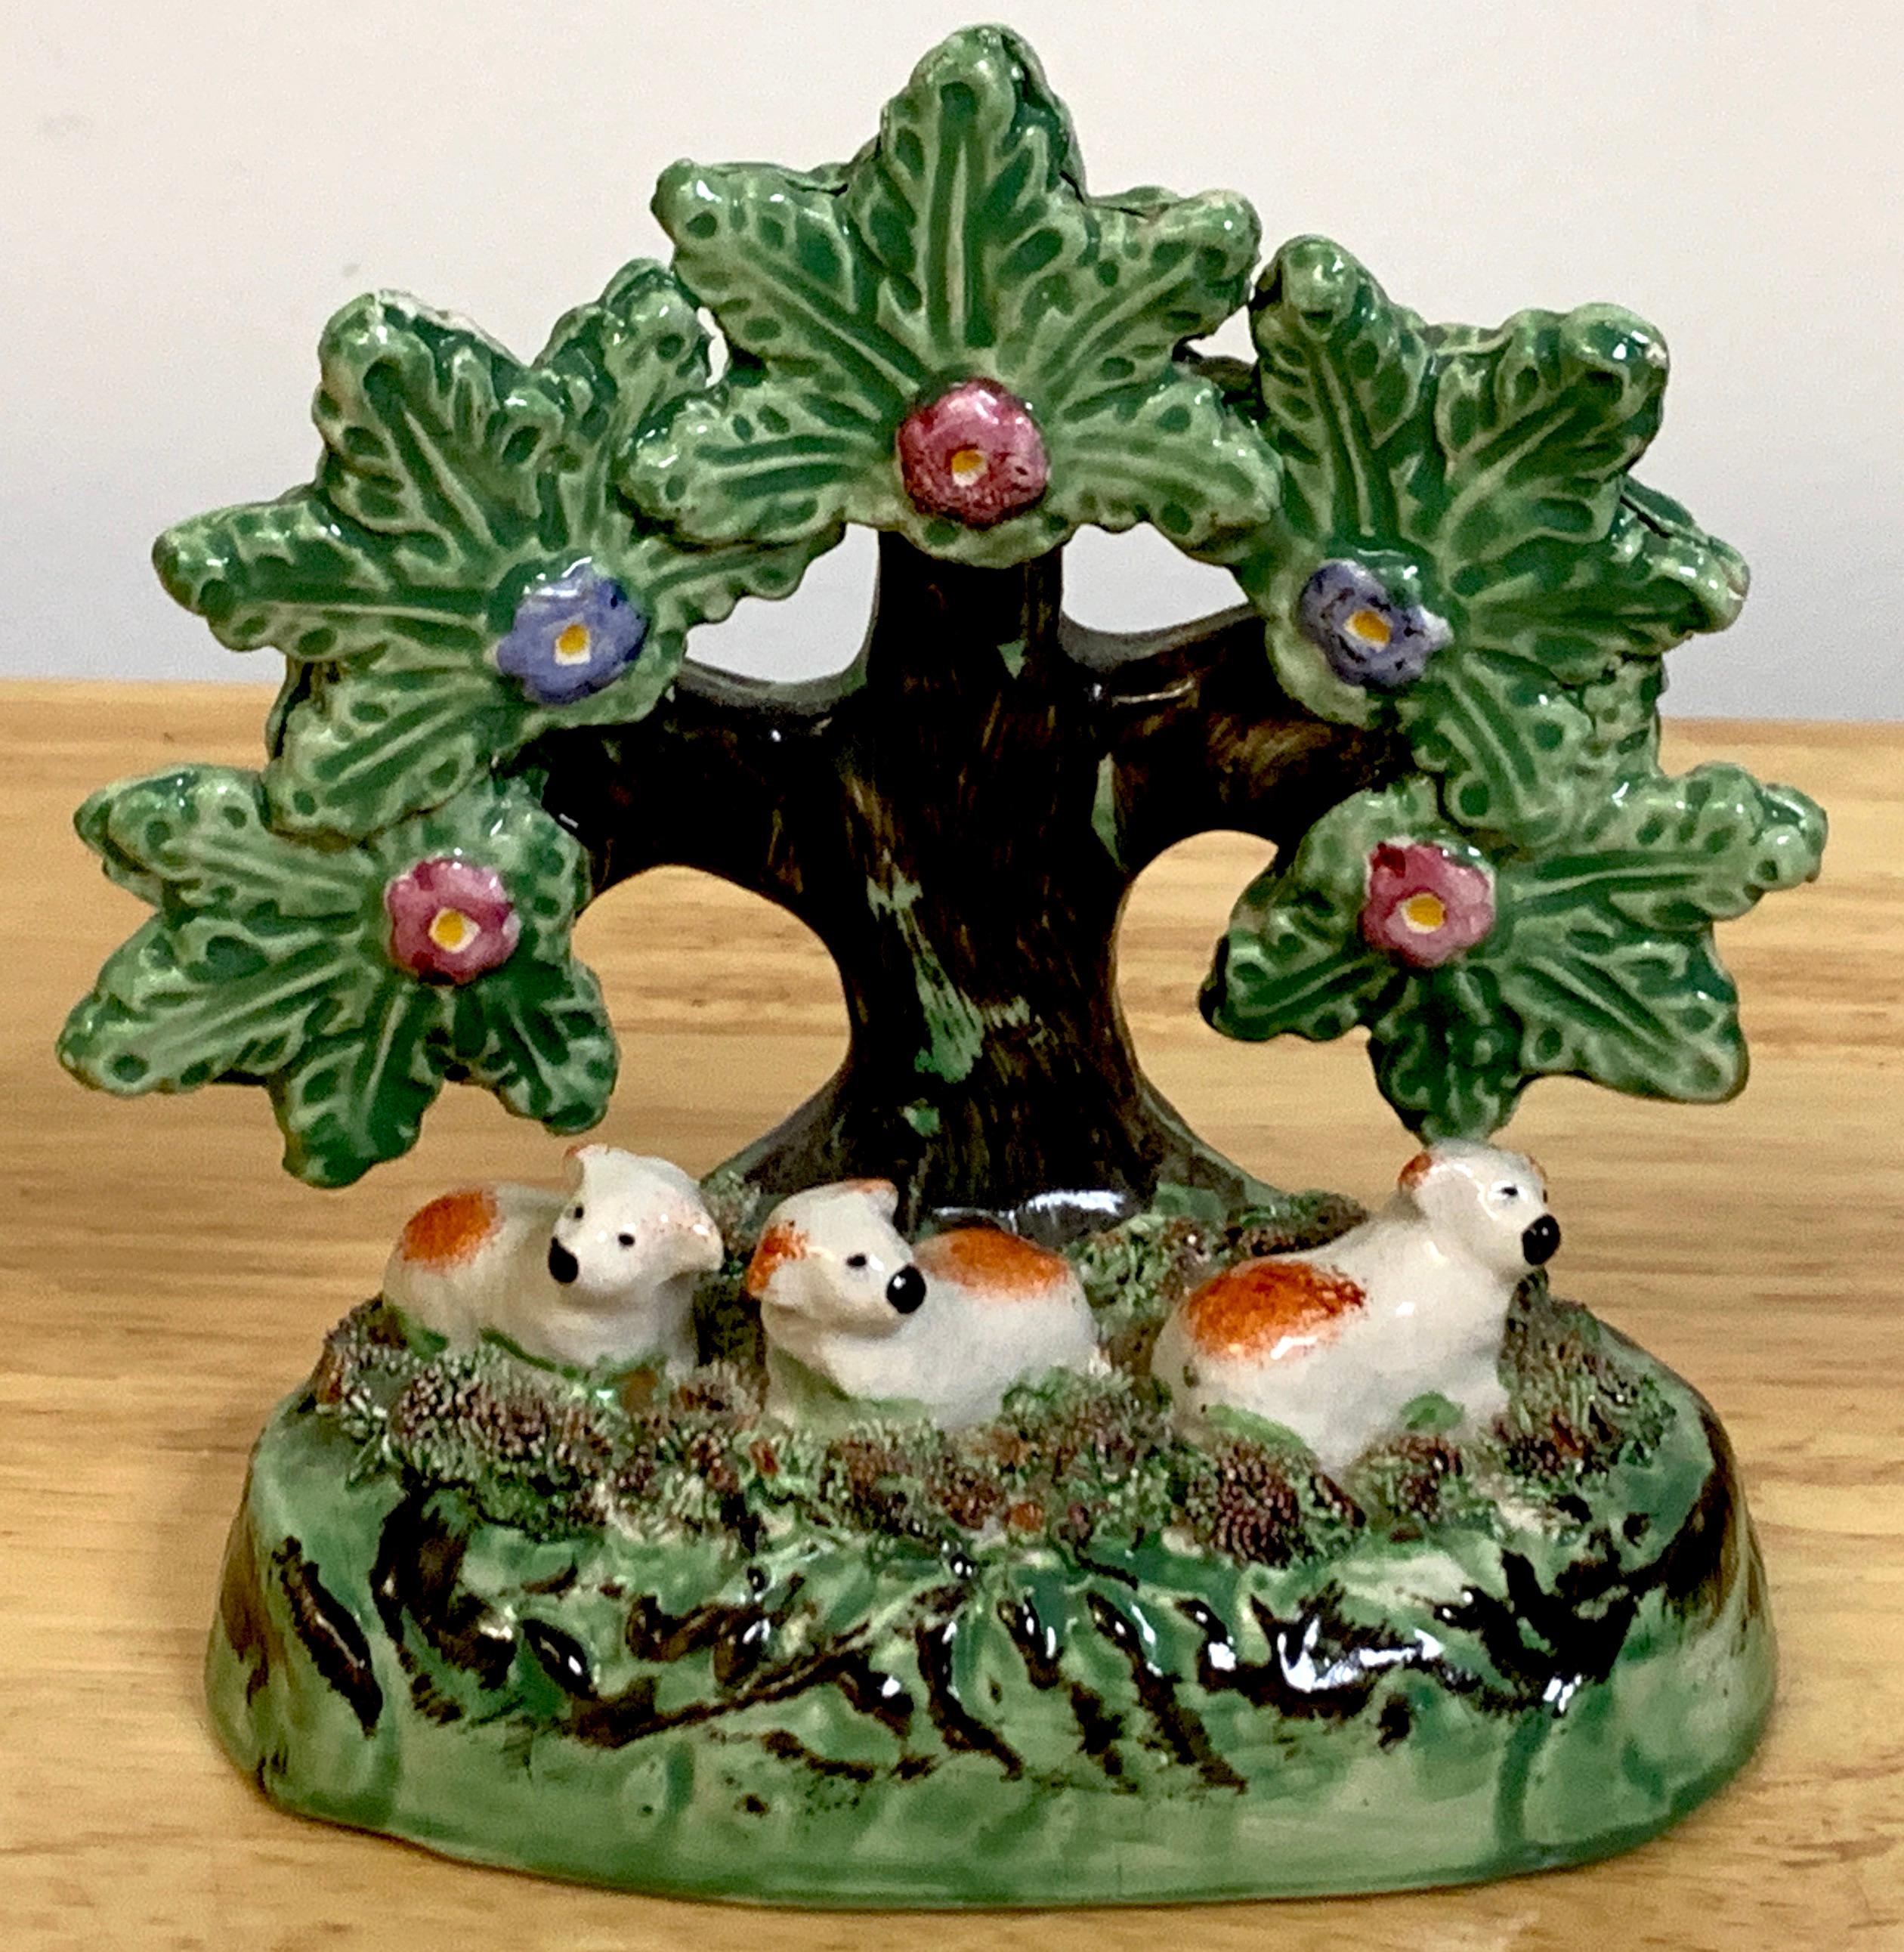 Staffordshire Pearlware bocage pack of red spaniel puppies or sheep- A rare whimsical grouping of three seated red and white animals under a tree on an oval naturalistic base.
     